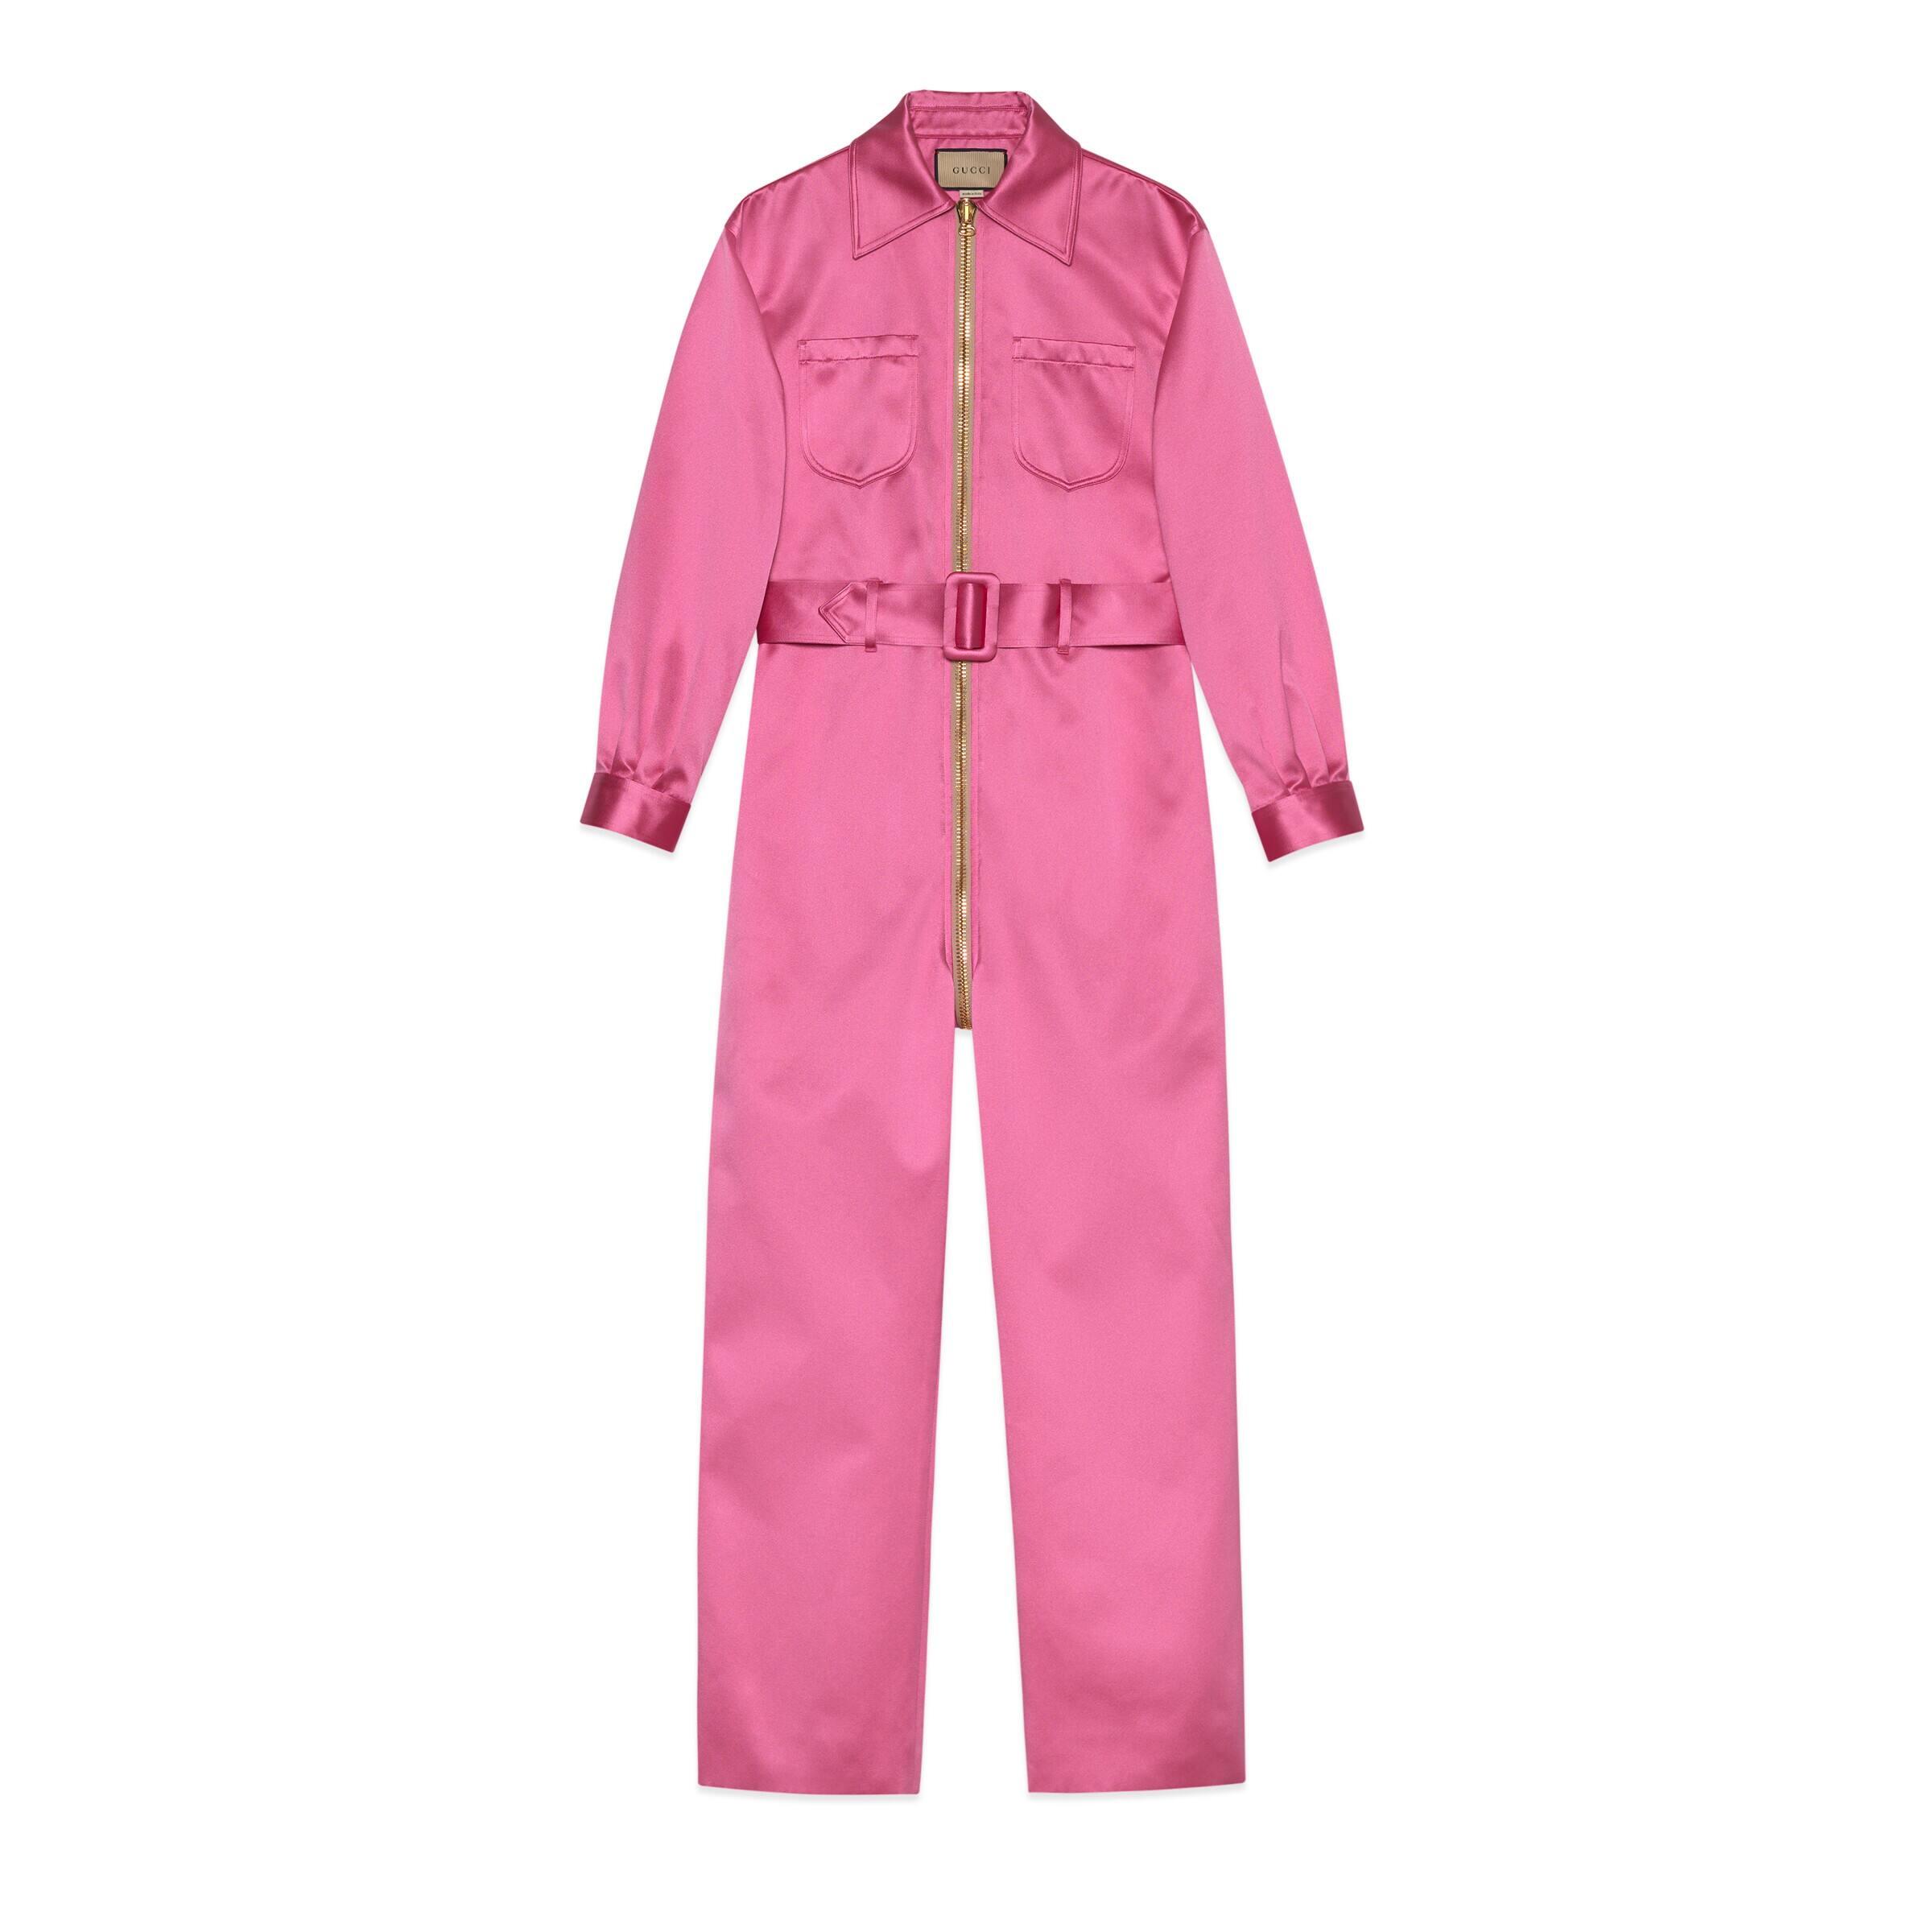 Gucci Silk Duchesse Pink Jumpsuit -With Tags- RRP$6,500 AUD | eBay